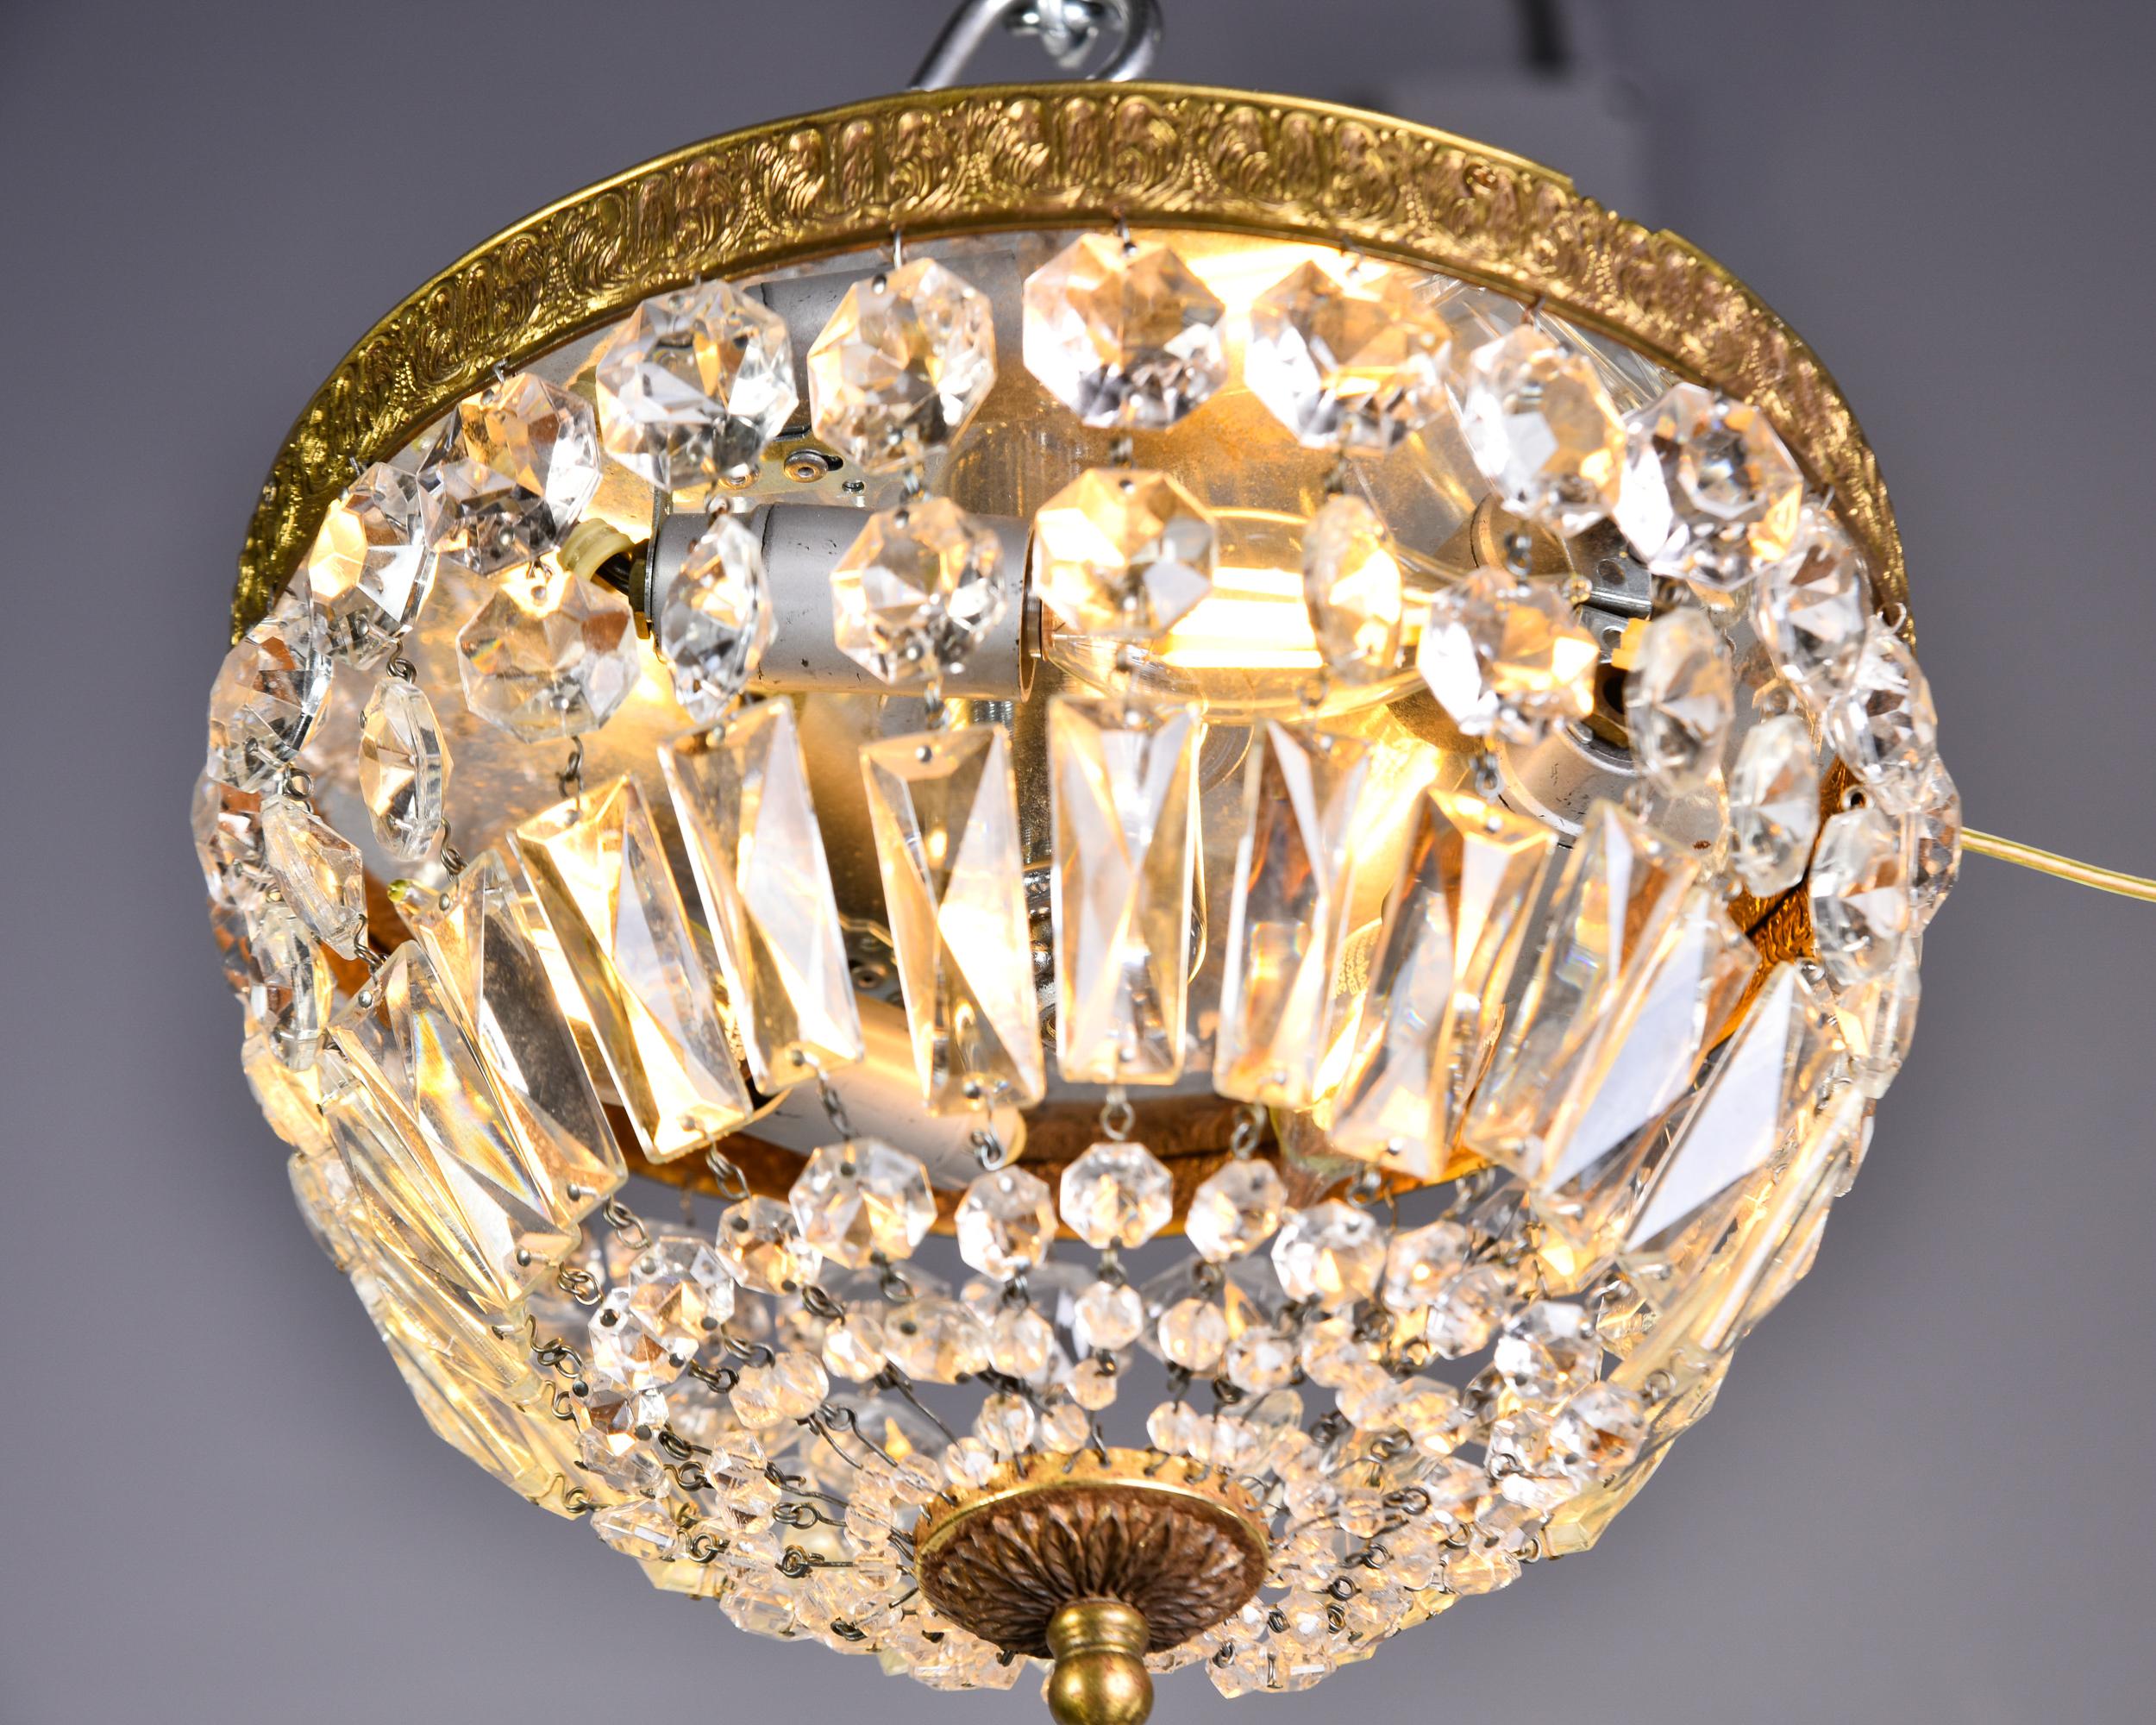 Vintage Italian Crystal and Brass Basket Form Ceiling Fixture For Sale 7